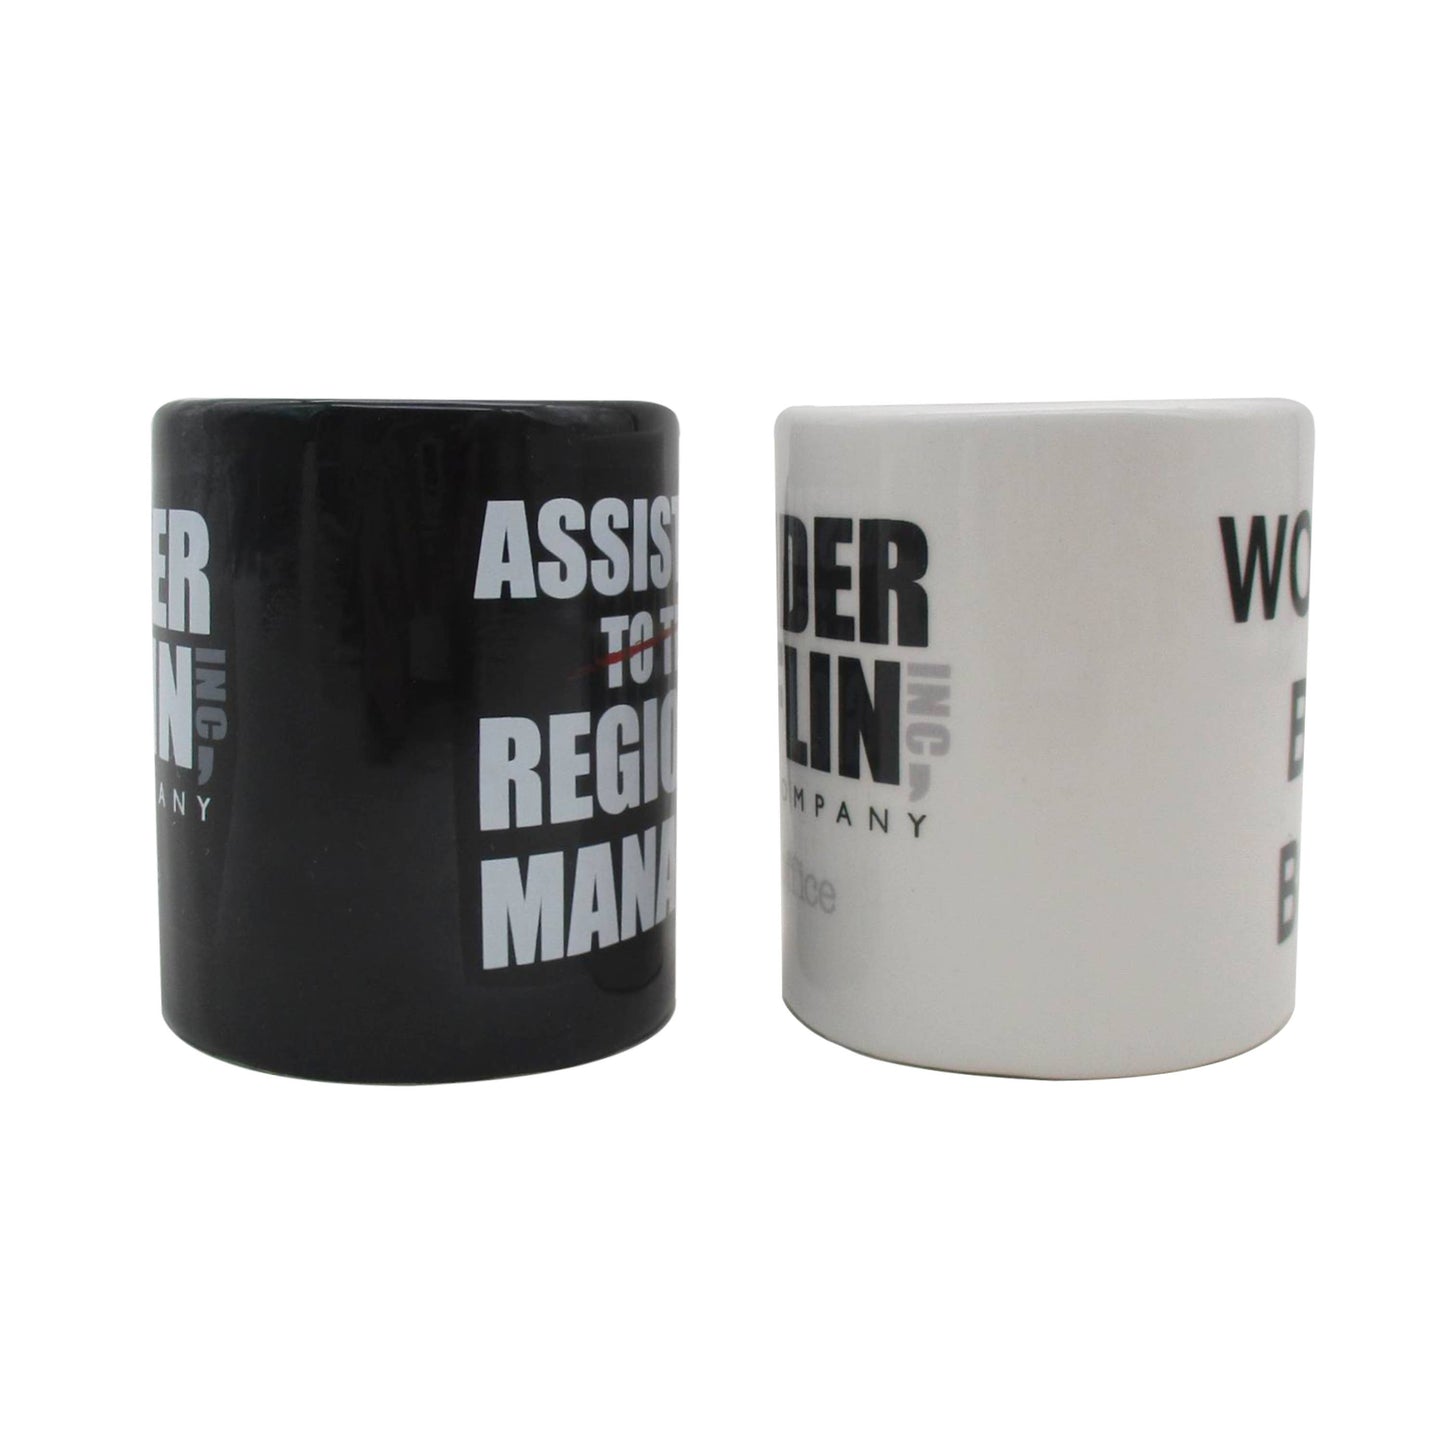 The Office Salt and Pepper Shakers